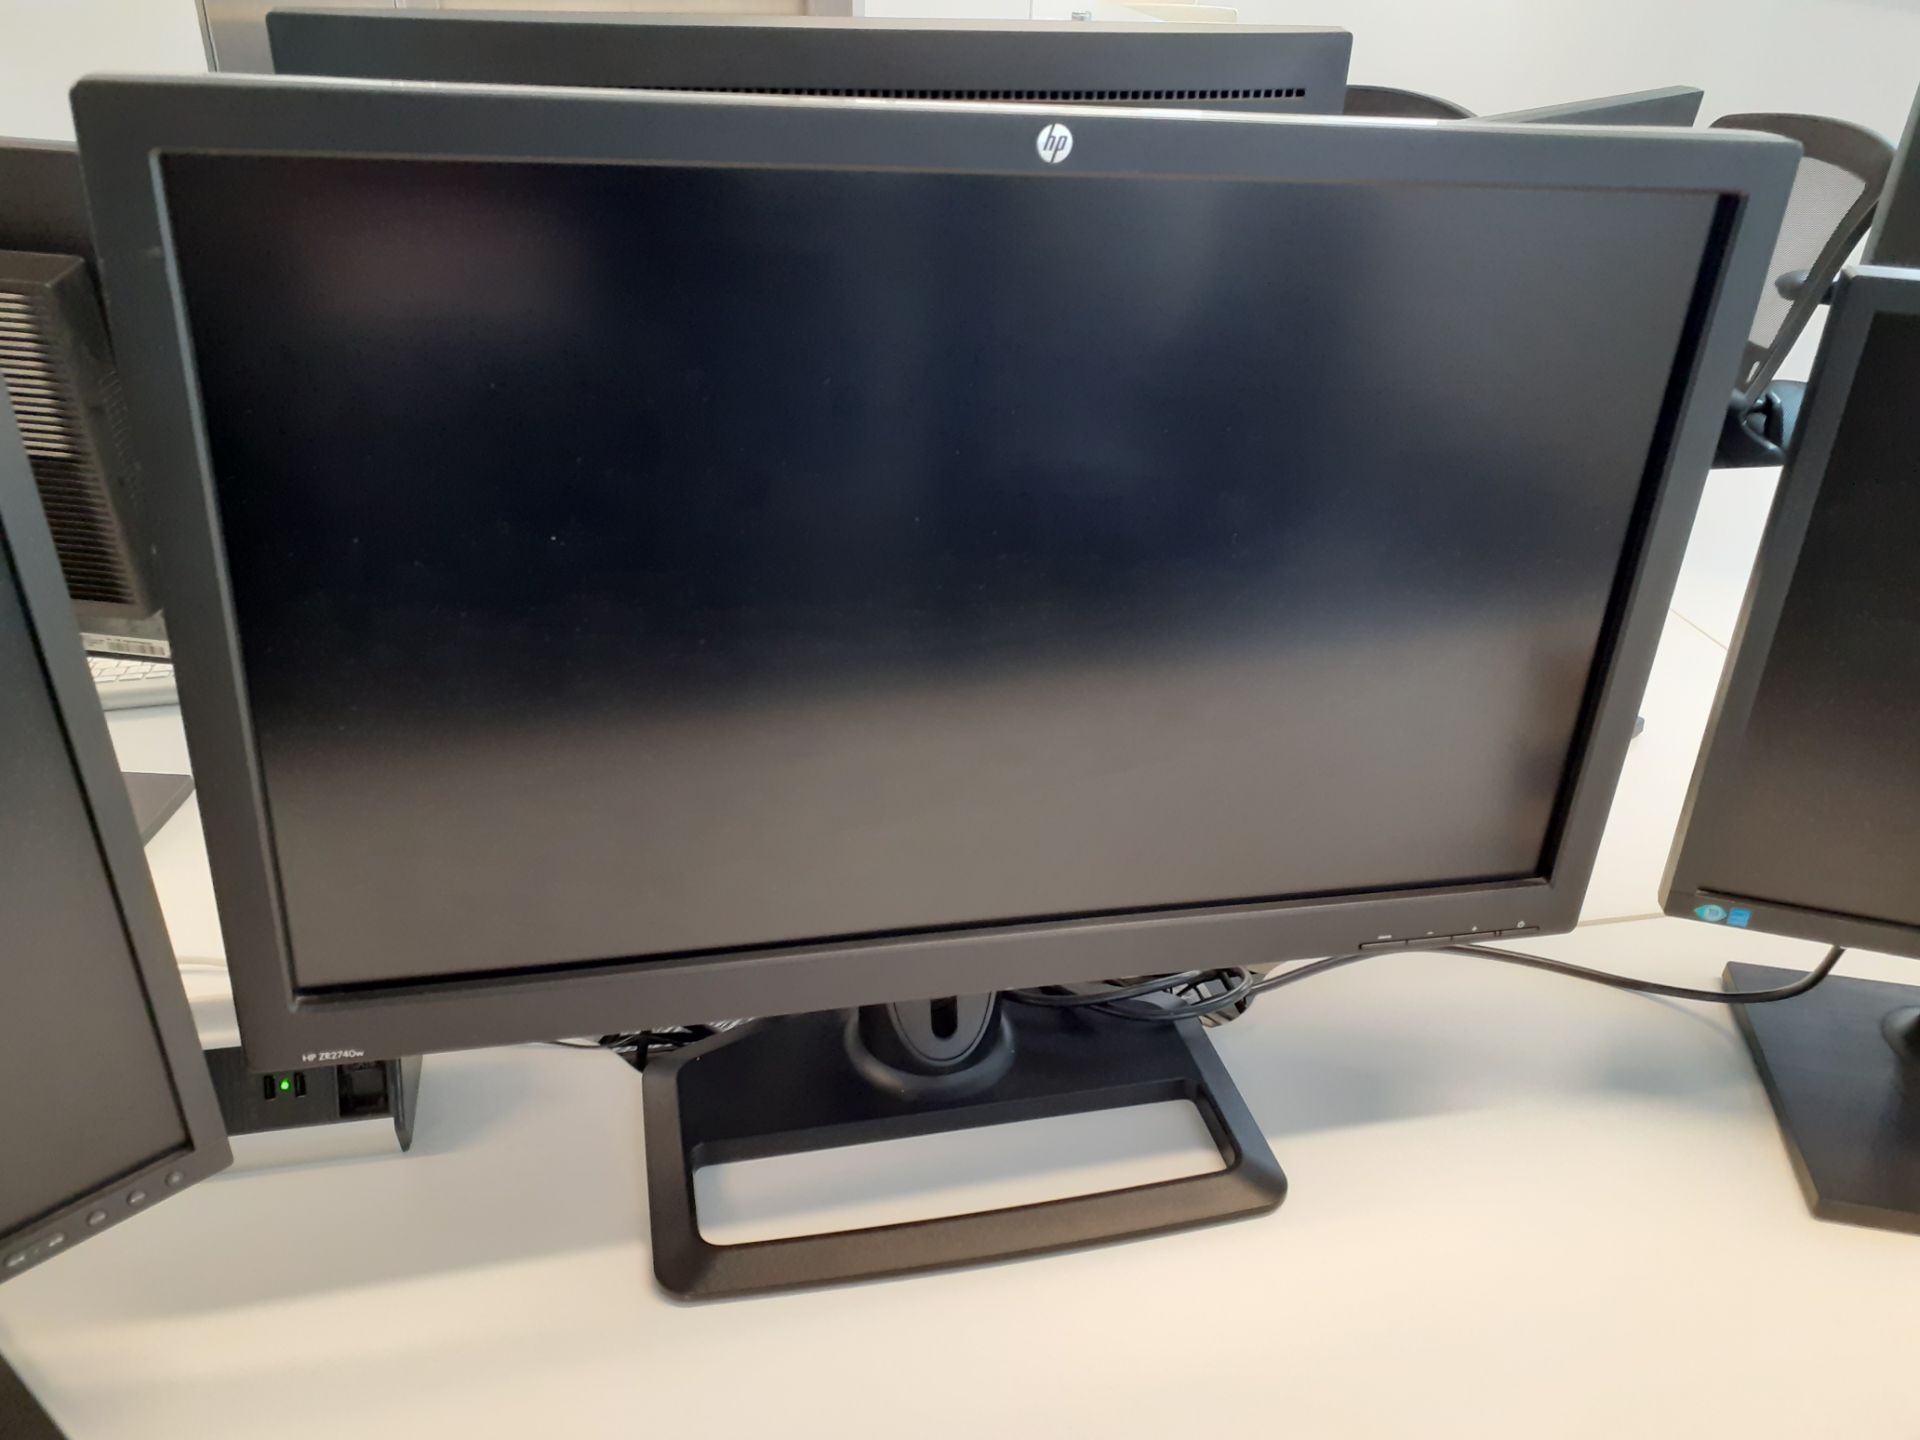 HPZR2740W 27” Computer Monitor